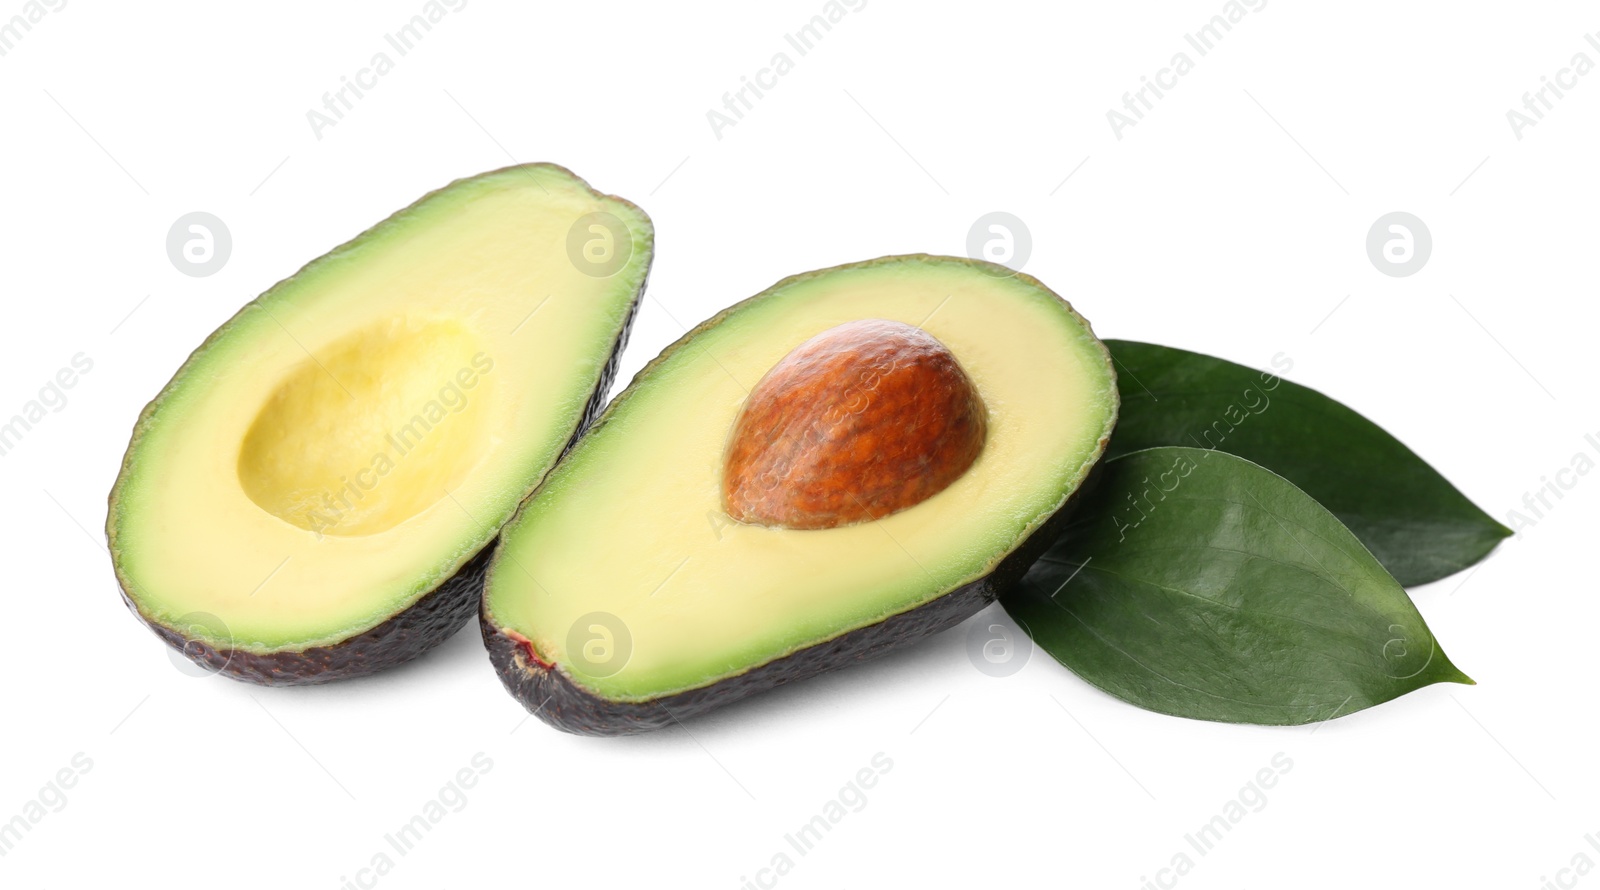 Photo of Cut hass avocado and green leaves on white background